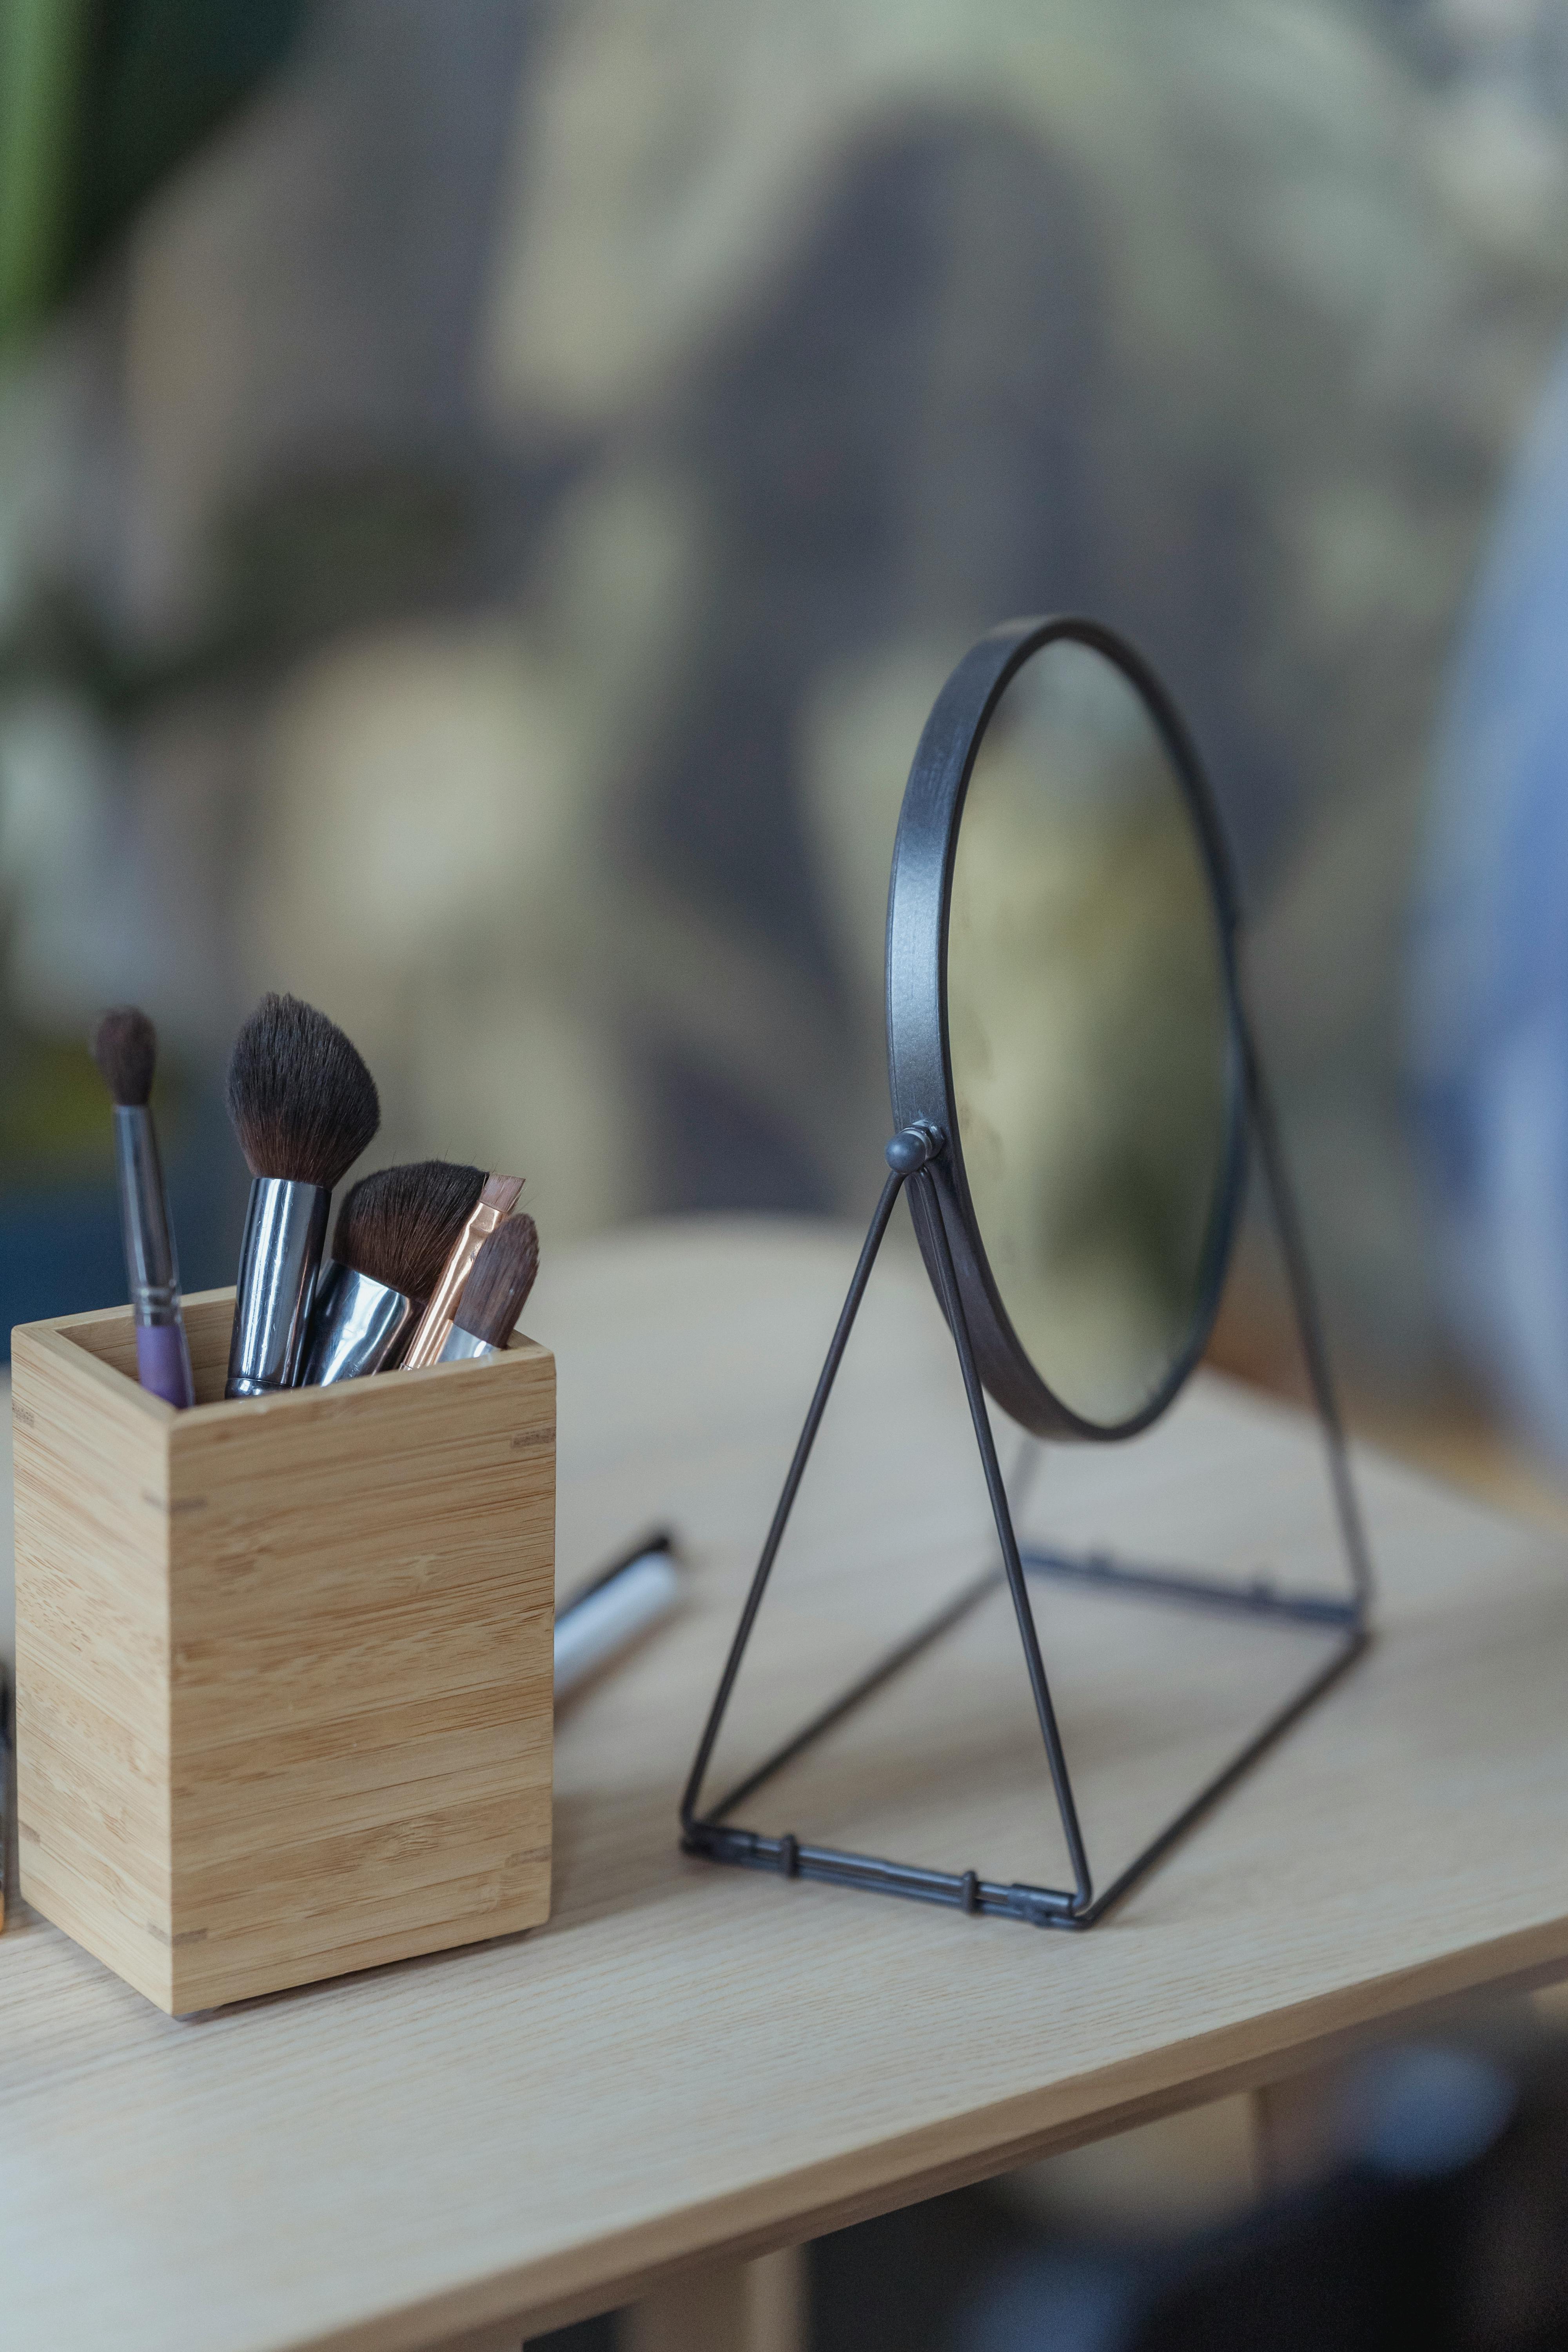 cosmetic brushes and round mirror placed on wooden table